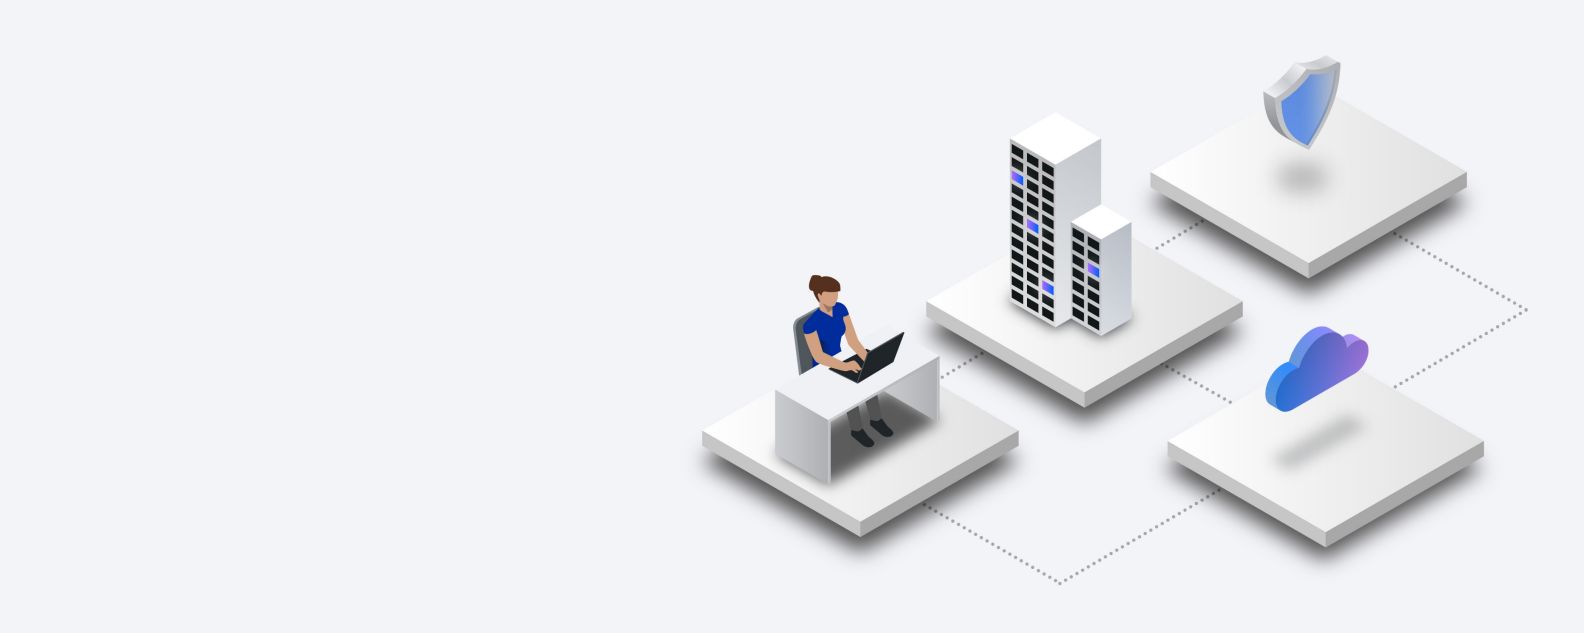 illustration of person at desk and connected to platforms representing computer servers, cloud technology and cyber security